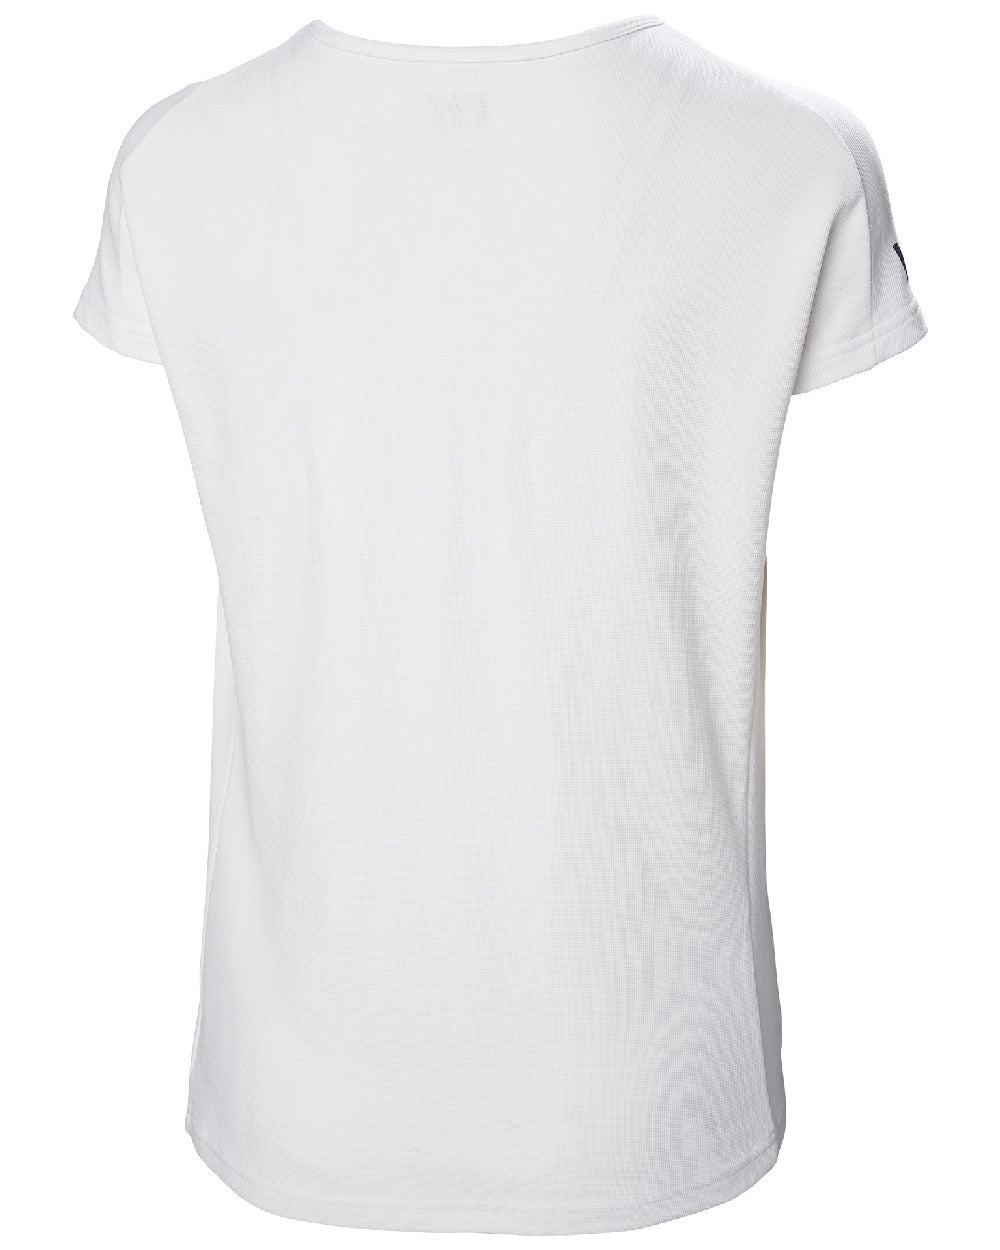 White coloured Helly Hansen womens crewline quick dry top on white background 